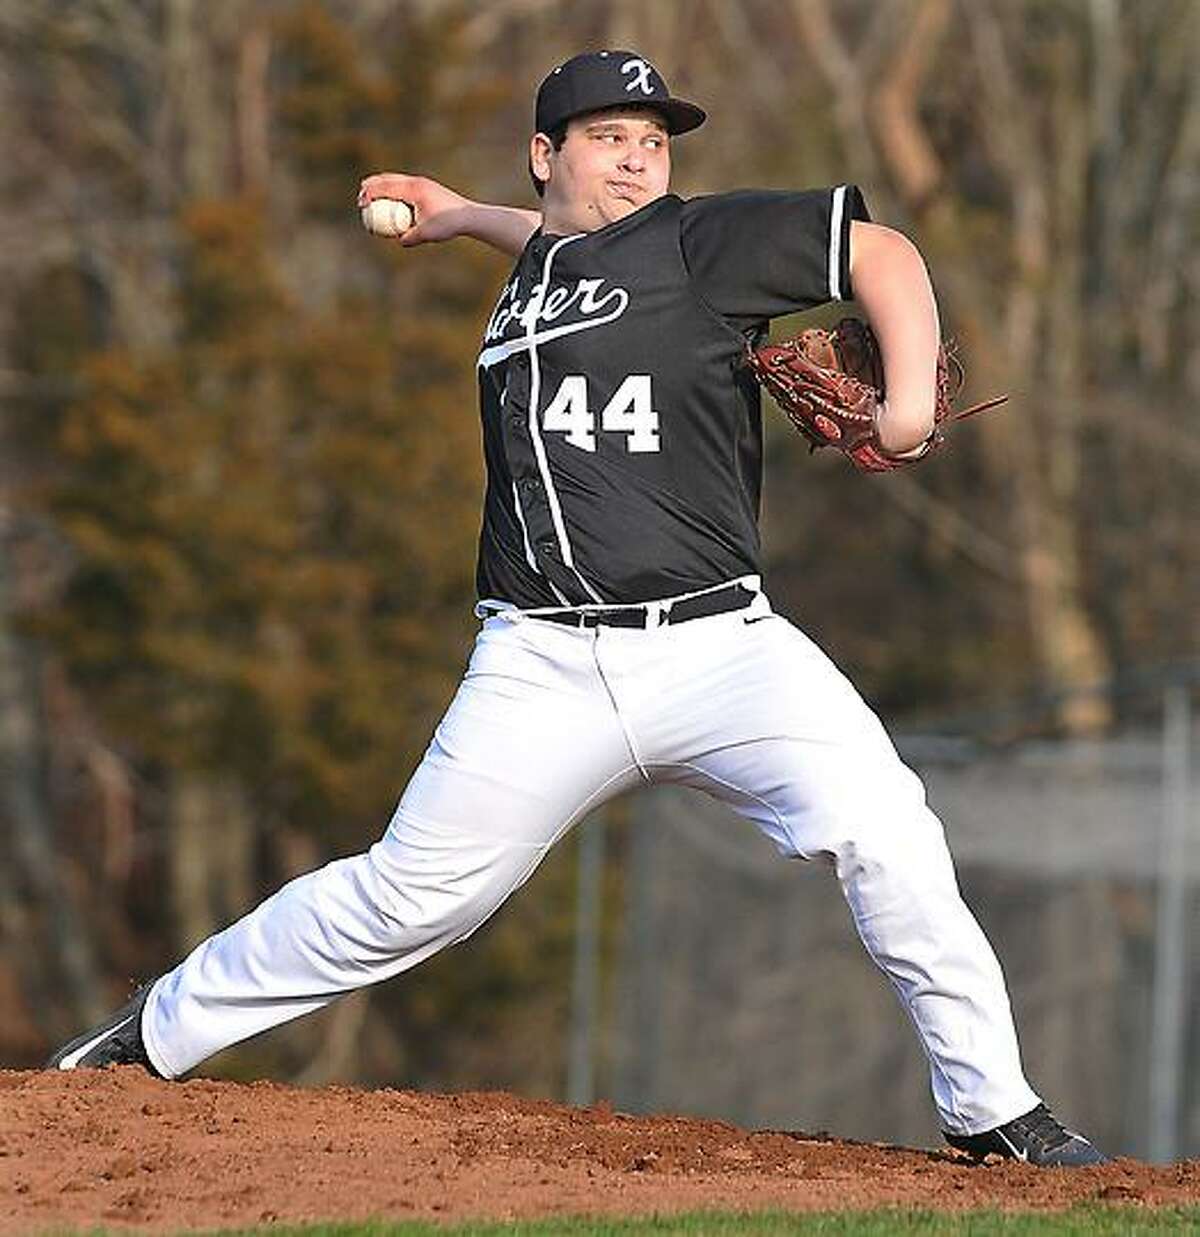 Catherine Avalone/The Middletown Press In this file photo, Xavier sophomore John Signore pitches in the seventh inning against Fairfield Prep earlier this season.